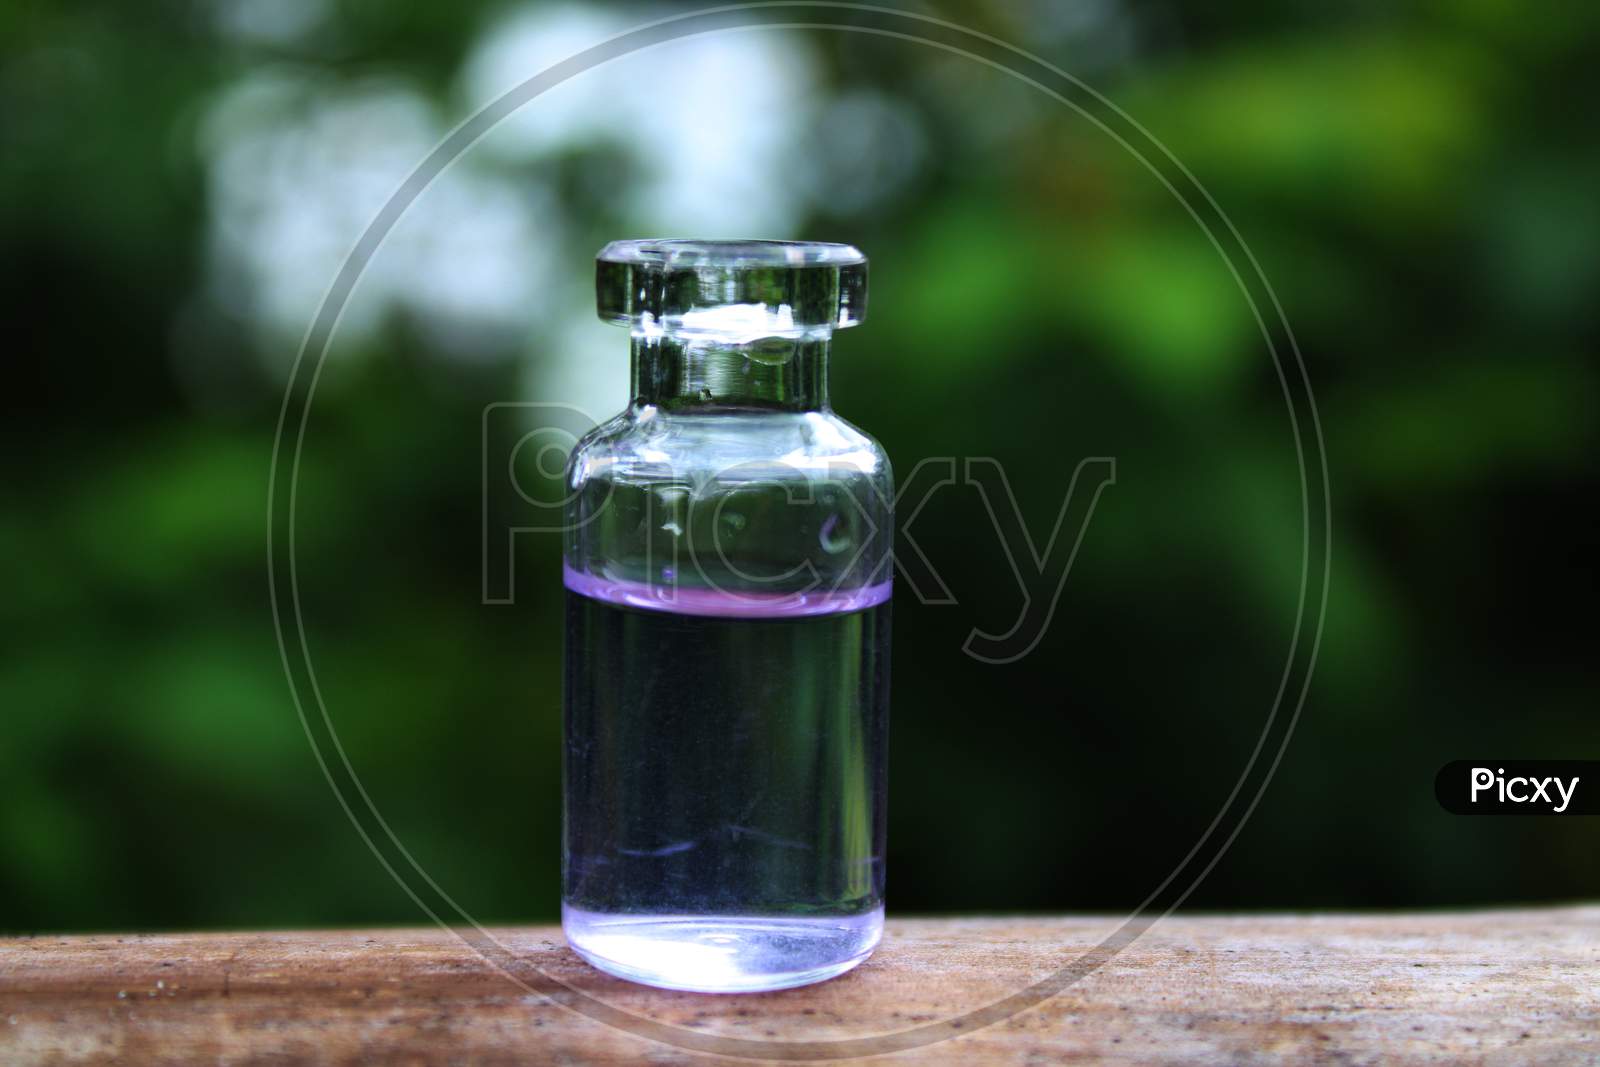 Water in the small bottle with natural background